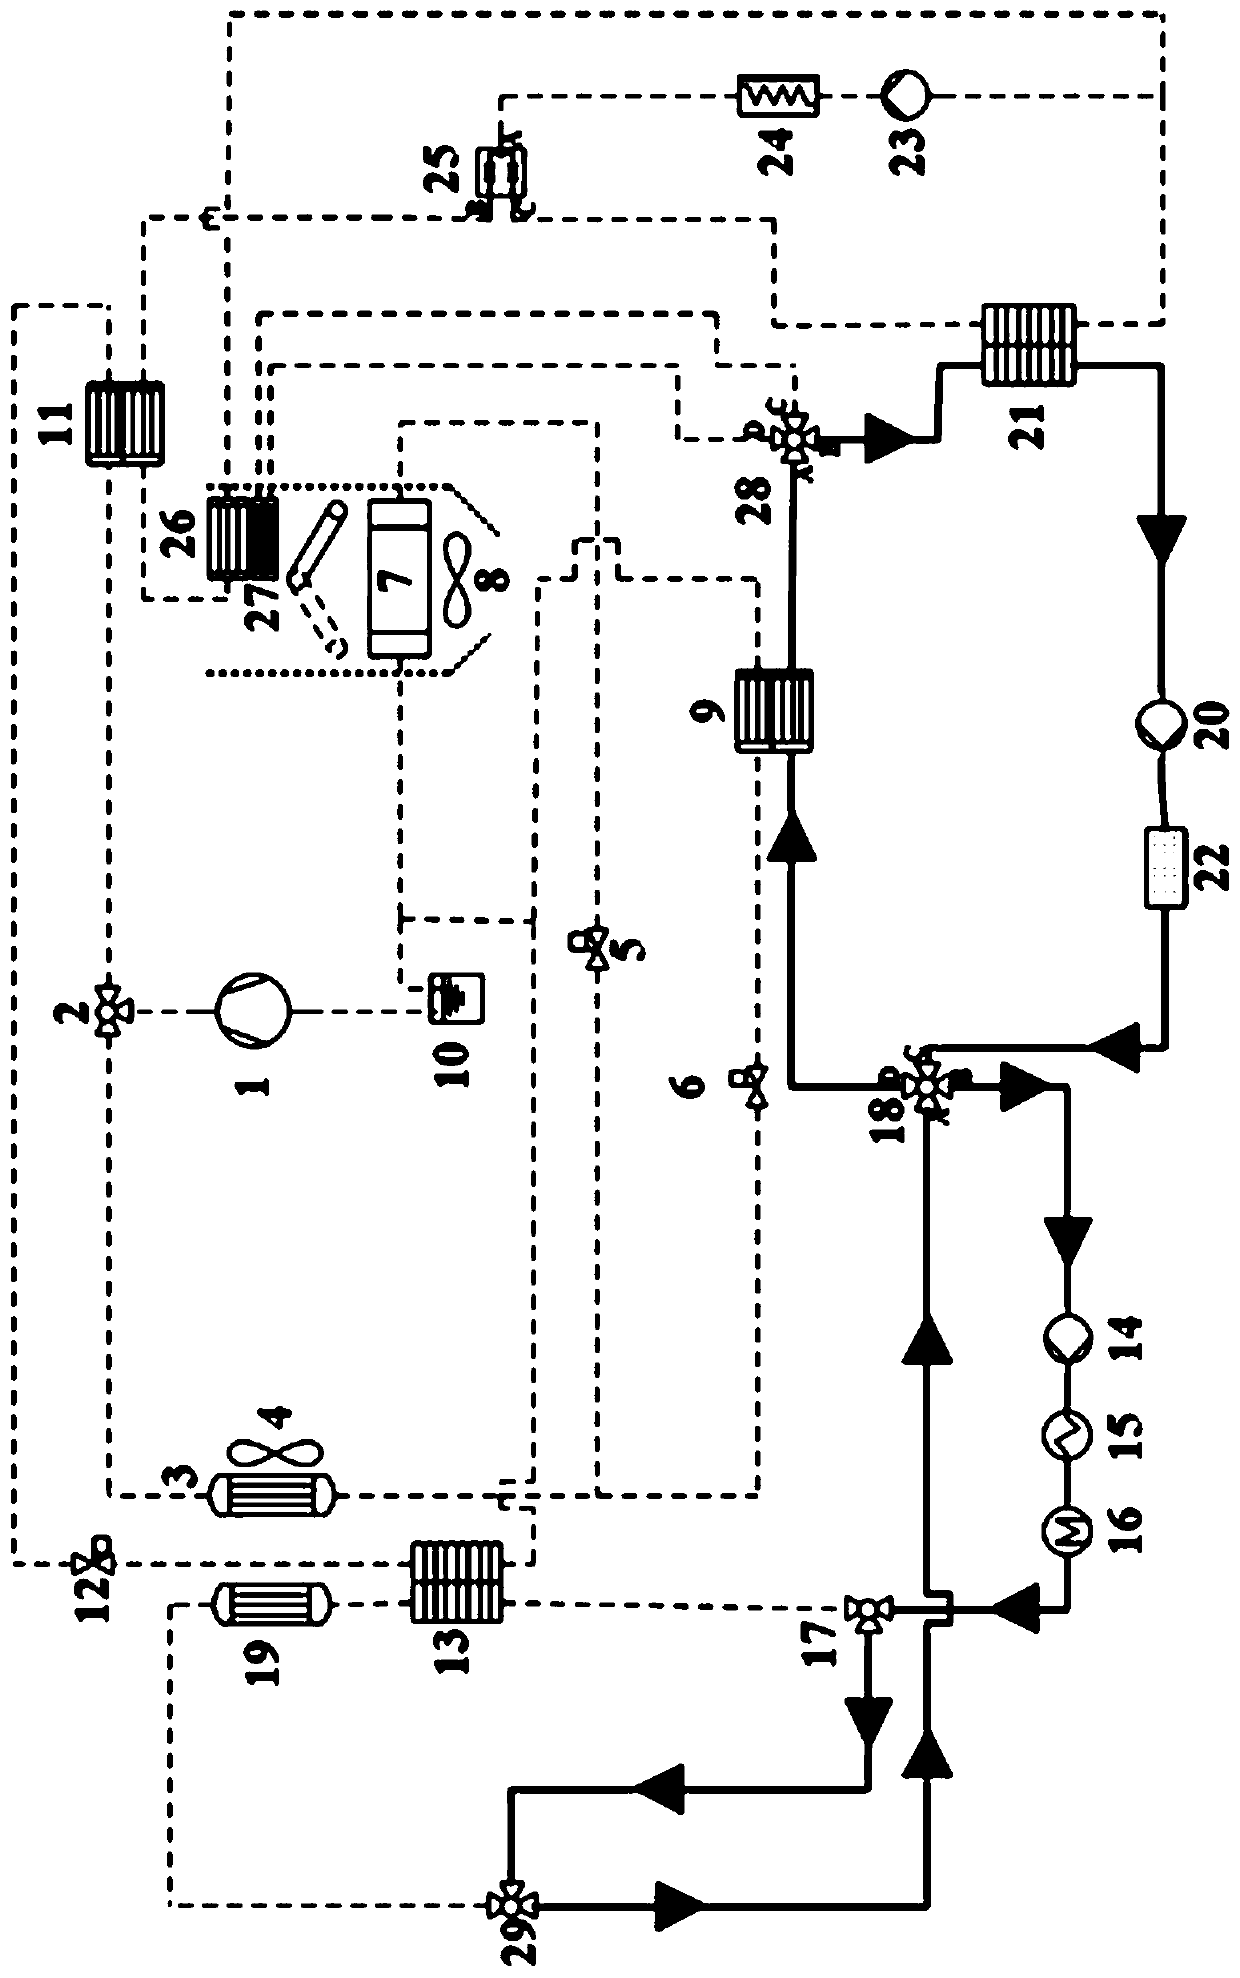 Heat management system for electric vehicle